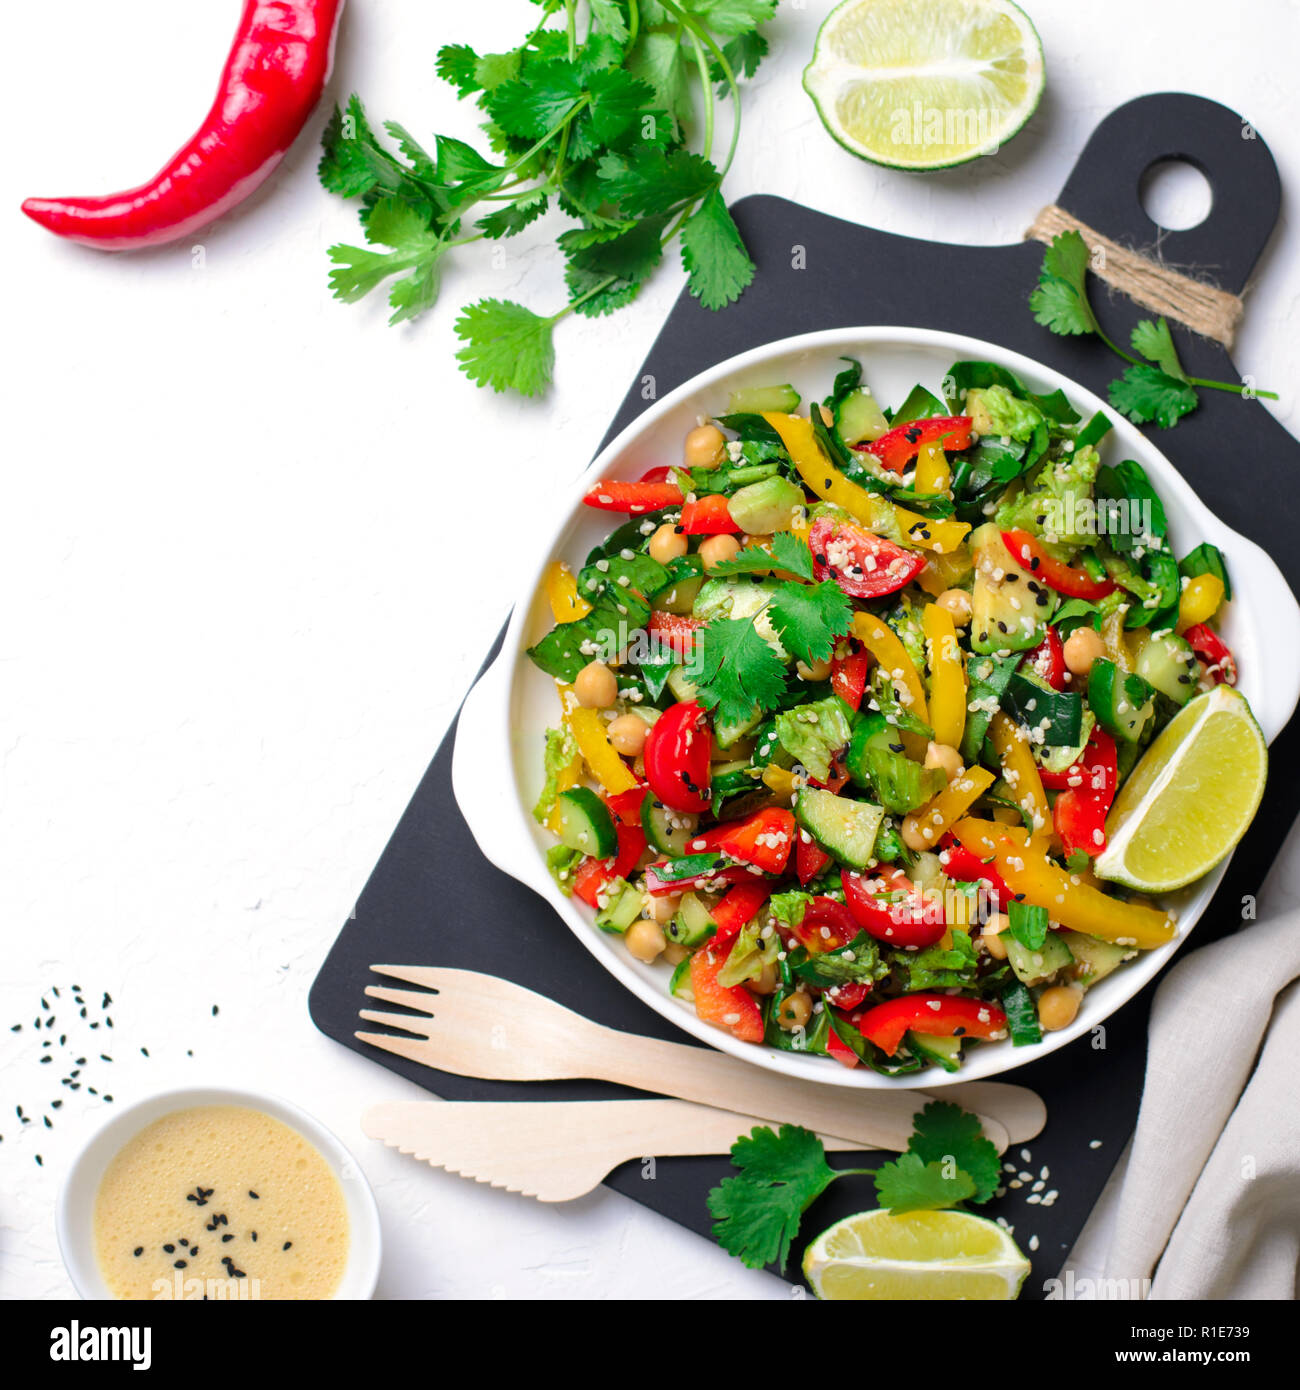 Fresh Vegetable Salad, Healthy Vegan Meal with Avocado, Chickpea, Bell Pepper, Cucumber, Spinach and Tahini Dressing, Healthy Eating Stock Photo